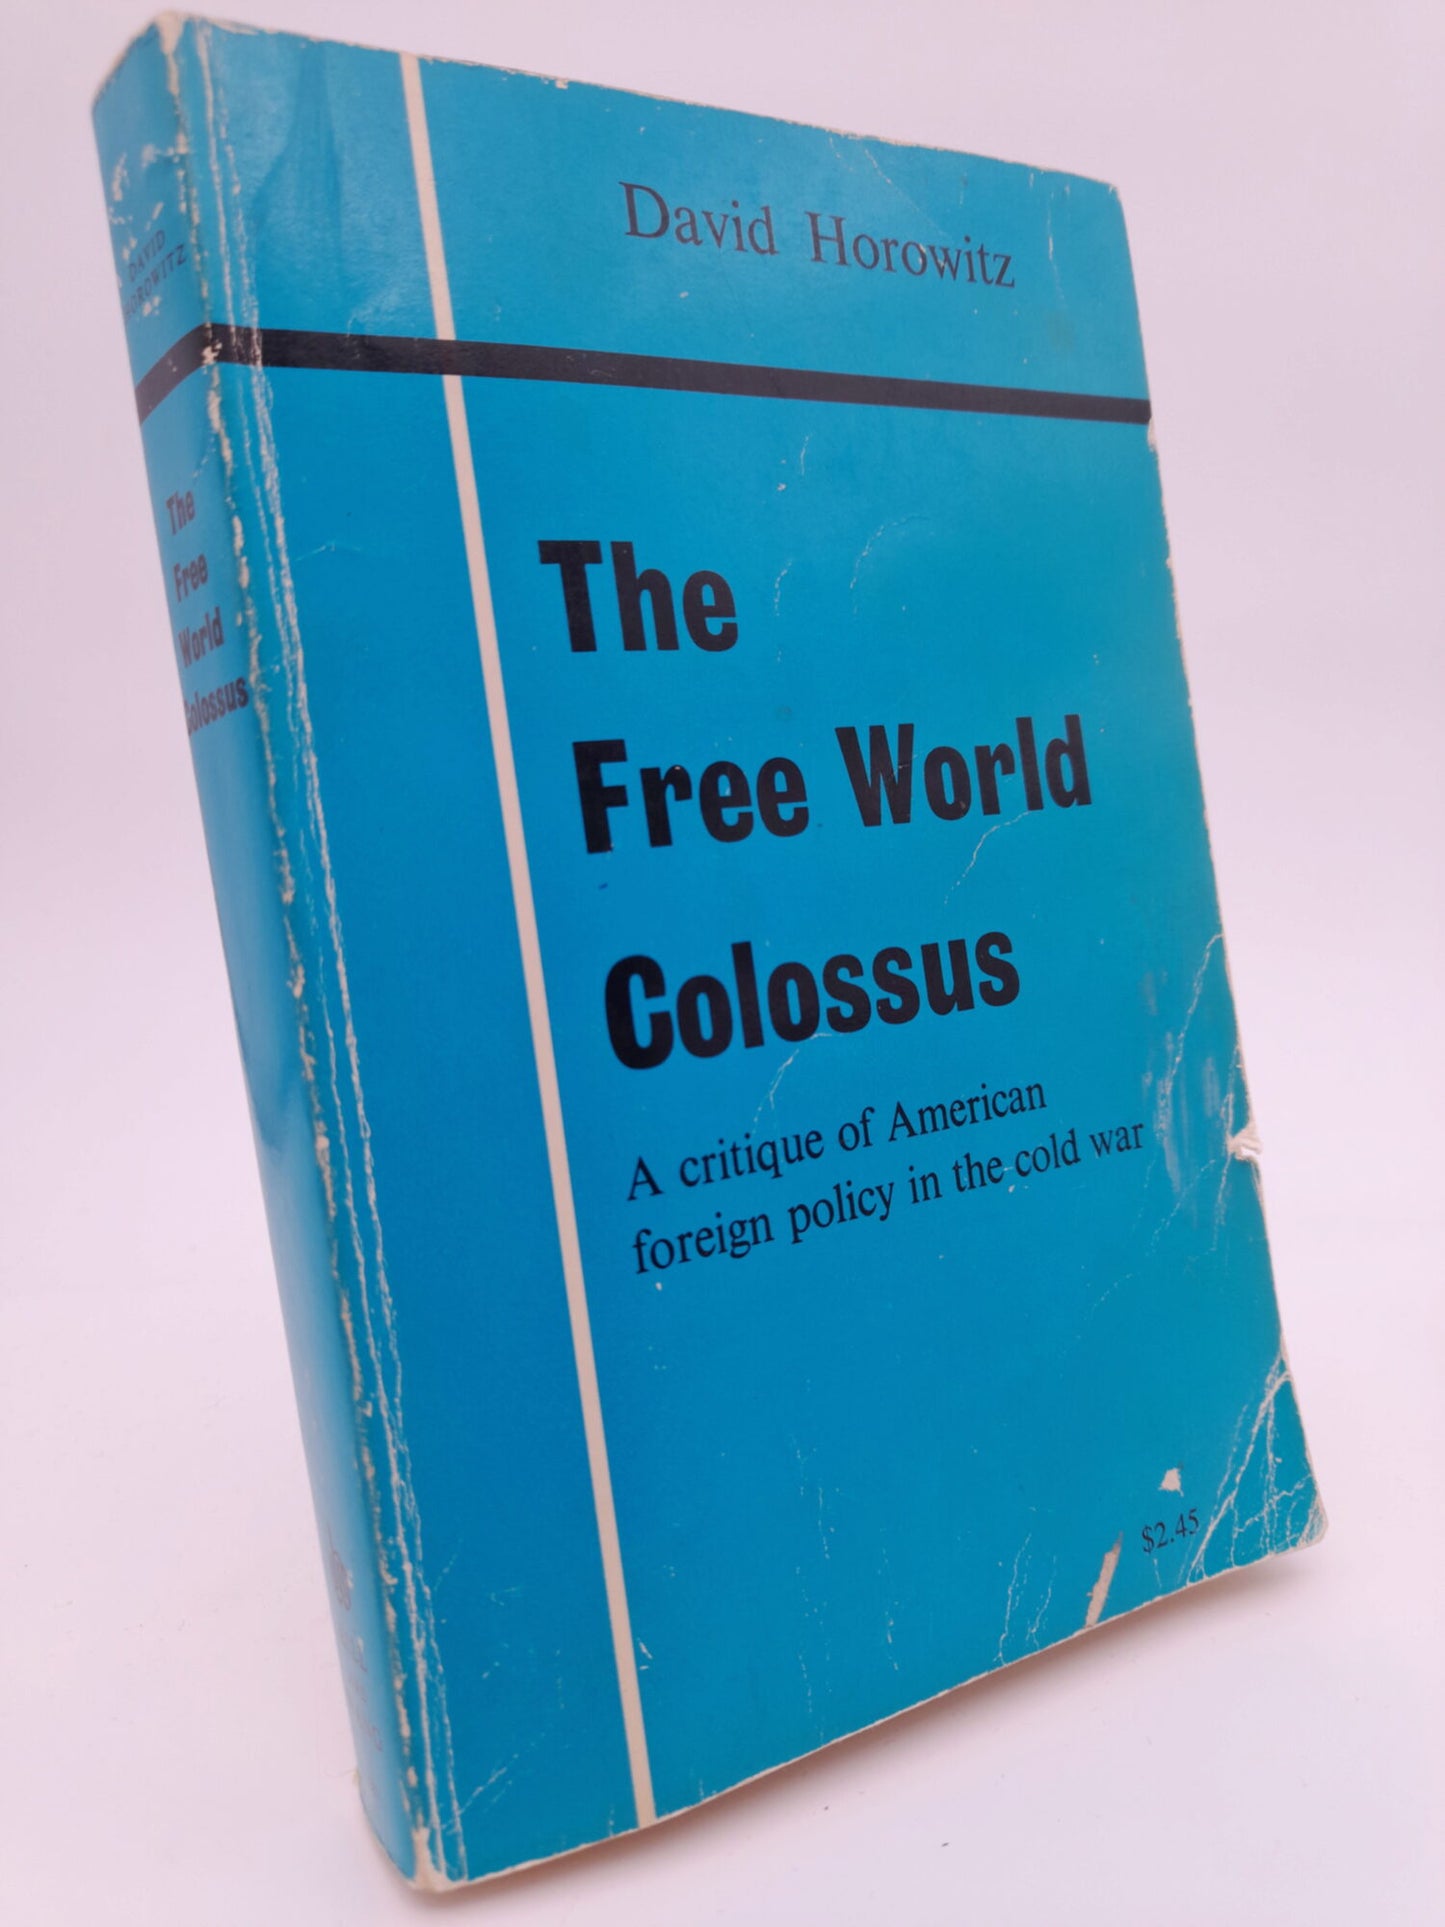 Horowitz, David | The Free World Colossus : A critique of American Foreign Policy in the Cold War